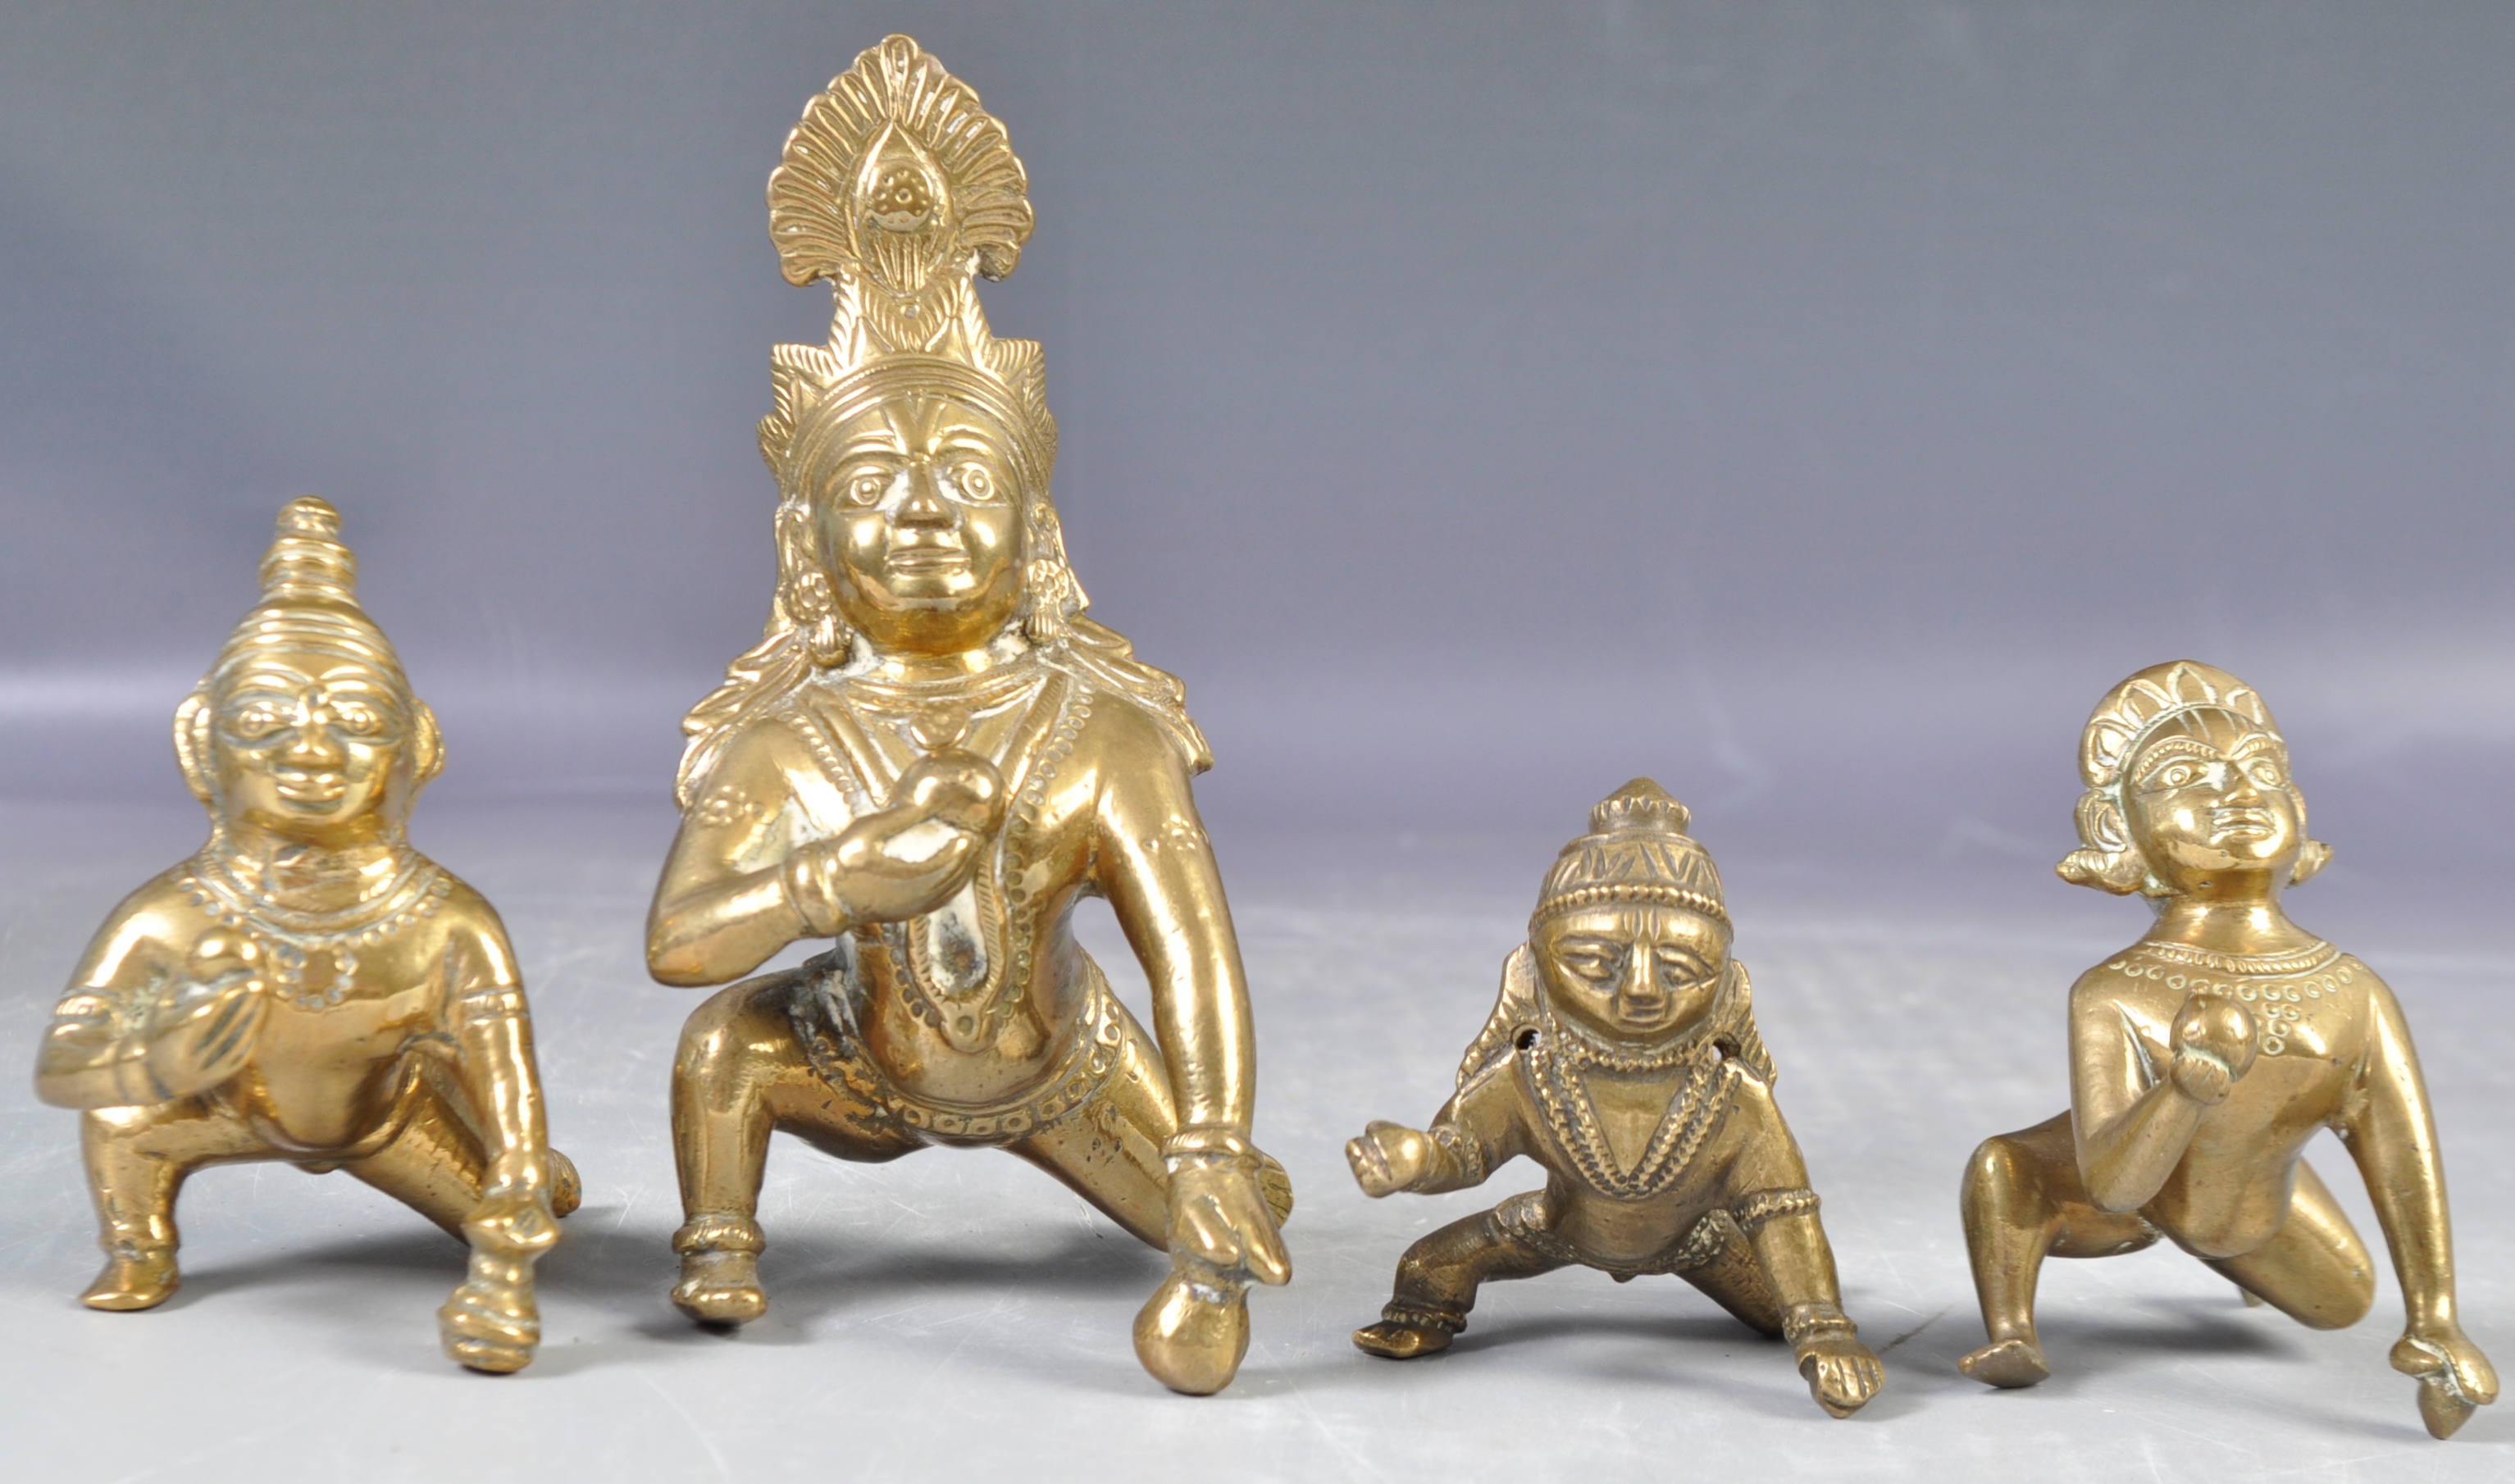 COLLECTION OF ANTIQUE FIGURES OF BOY KRISHNA AND BUTTER BALL